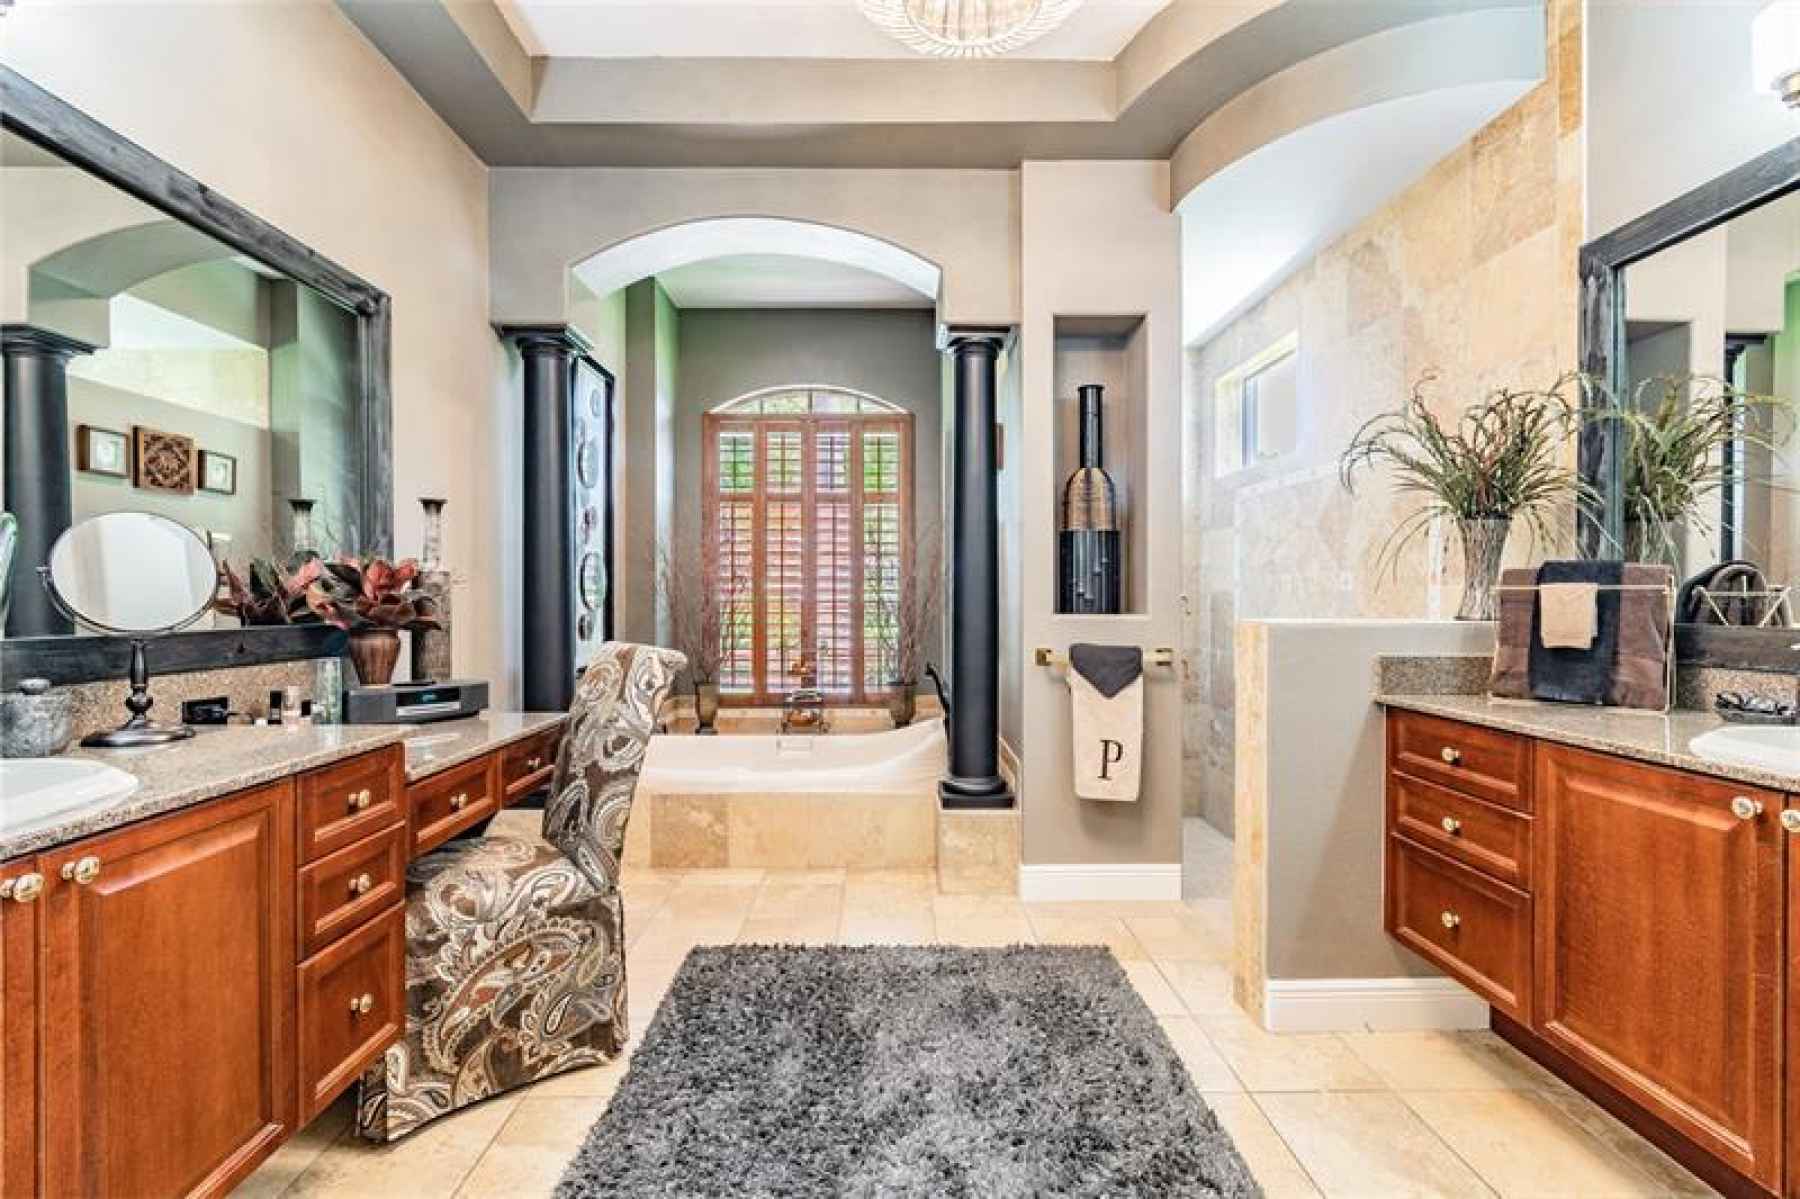 Master bathroom with garden tub and separate vanities